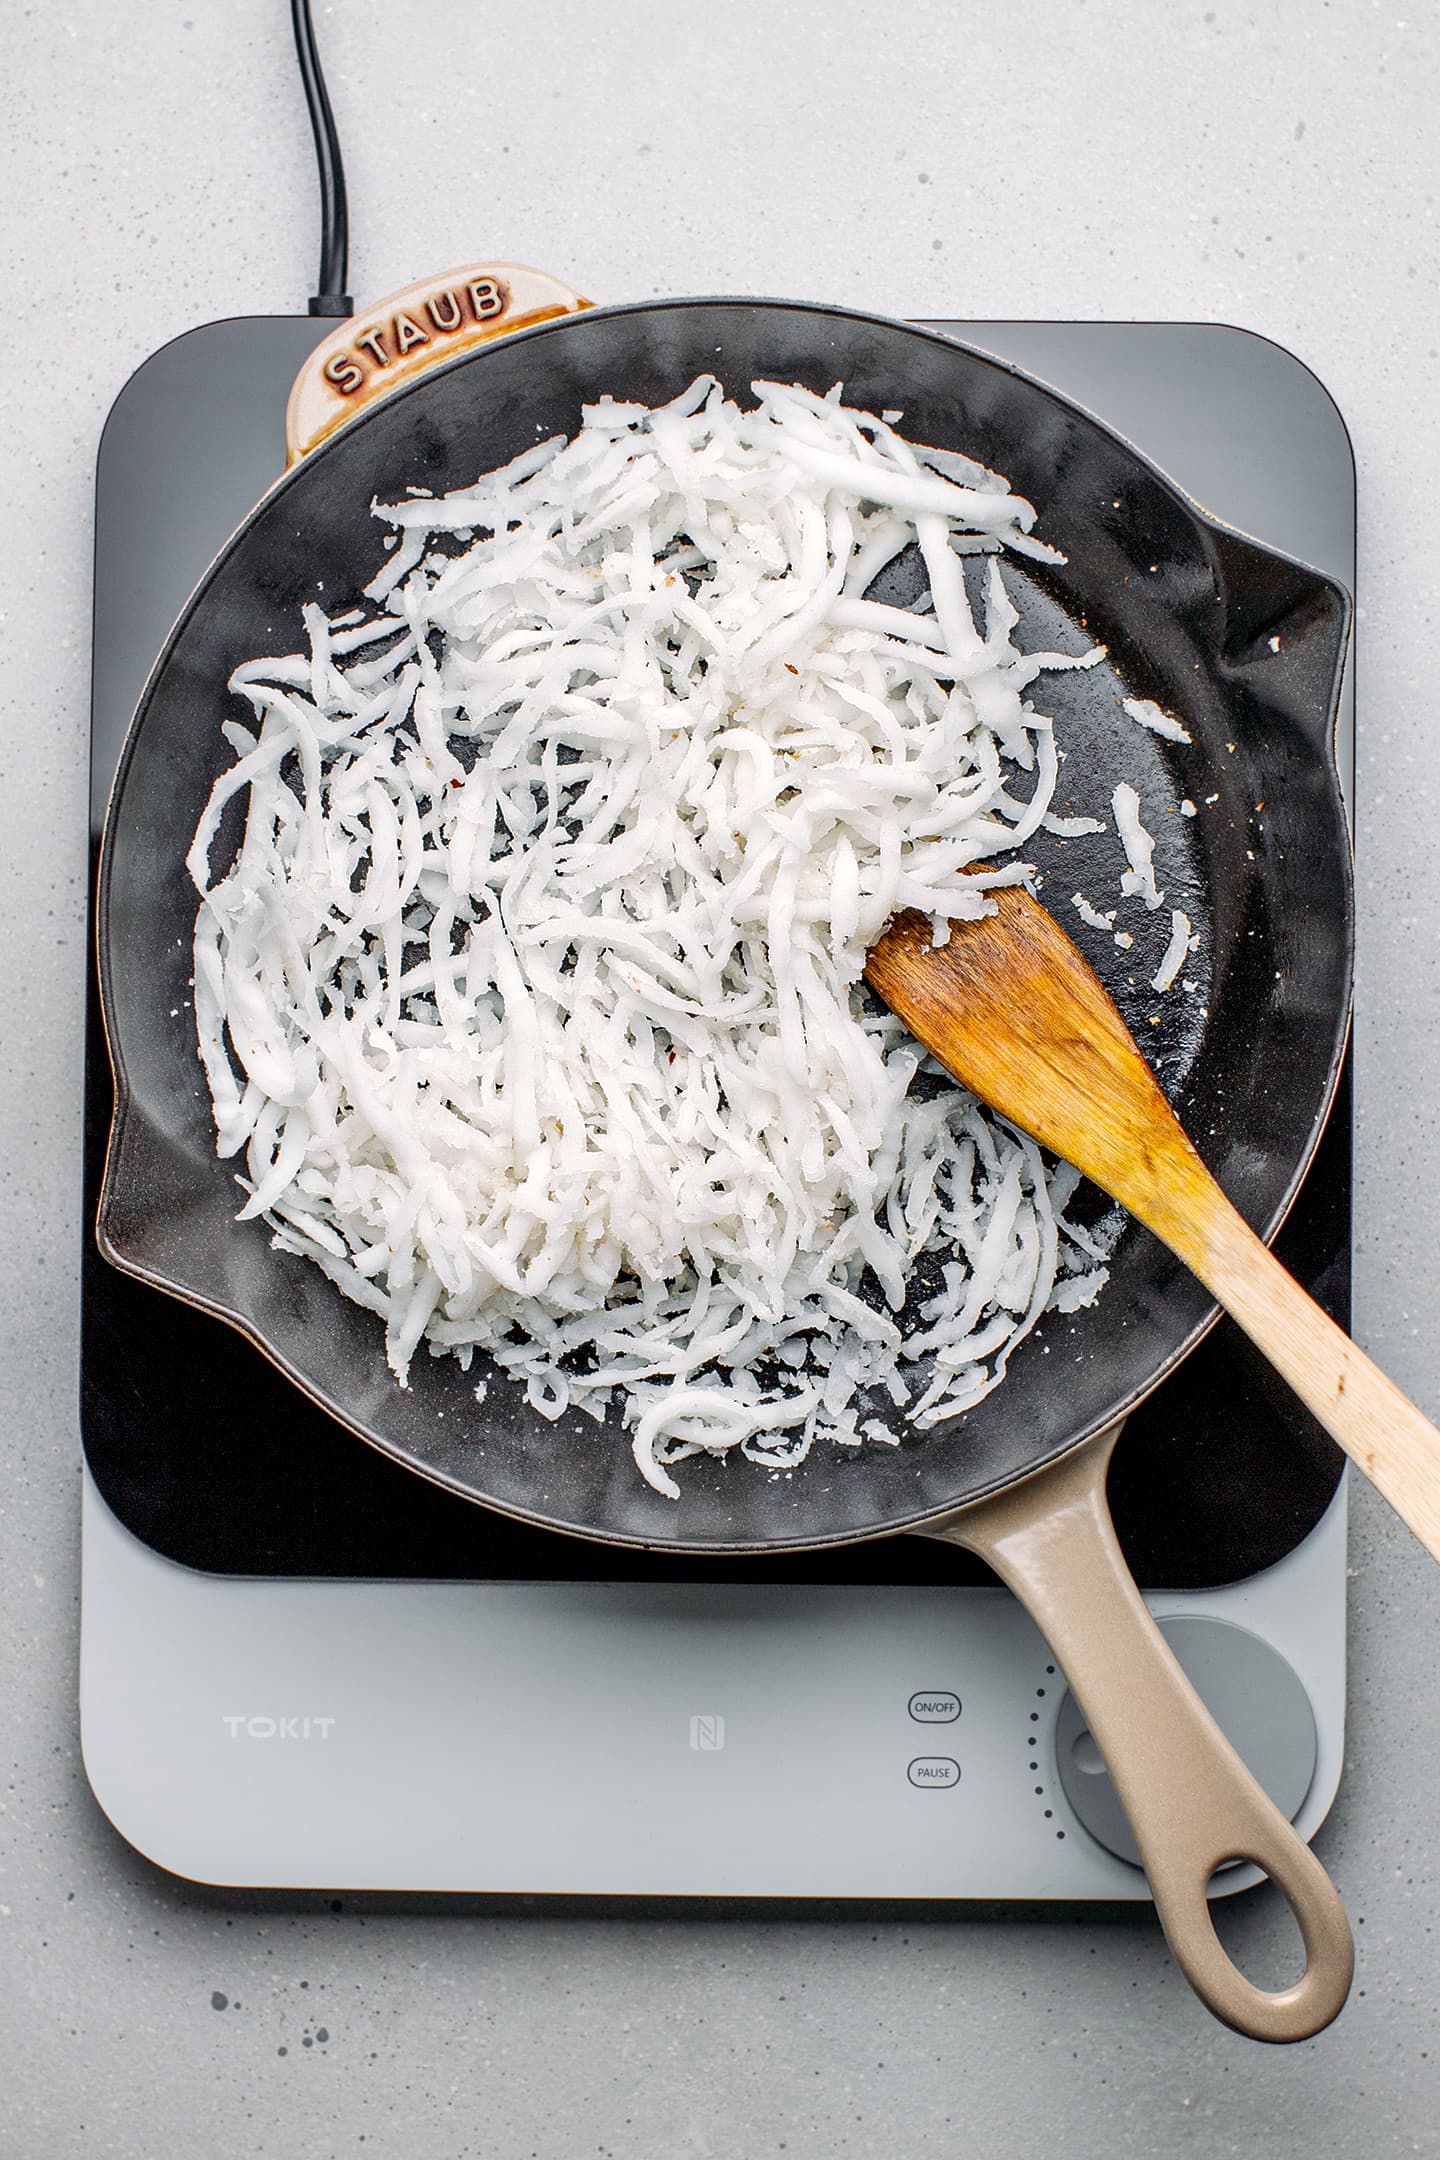 Shredded coconut in a pan.